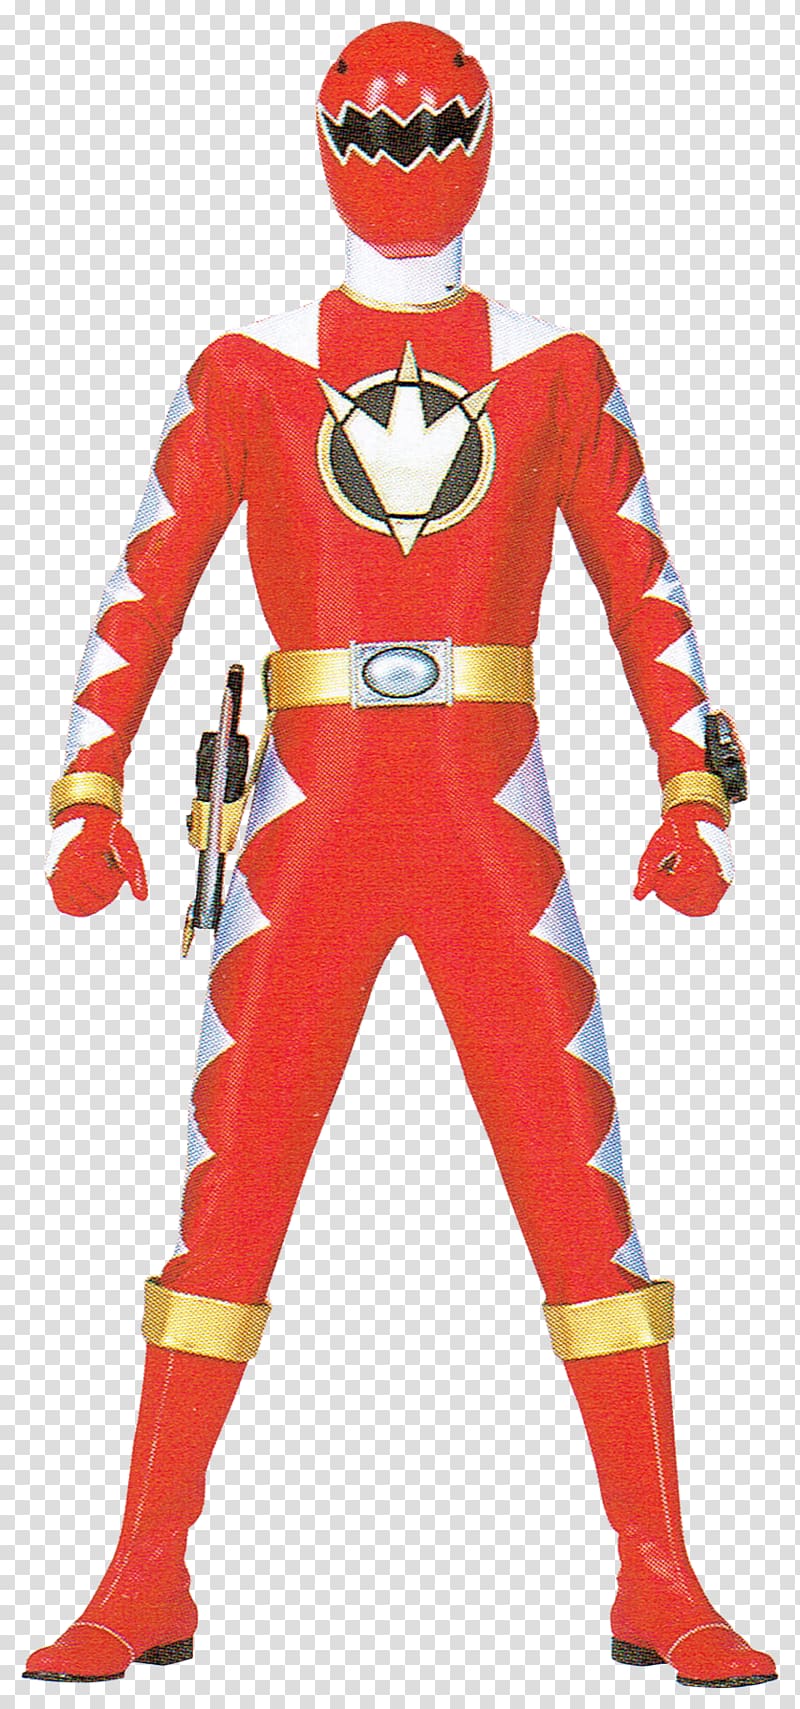 Power Rangers S.P.D. Tommy Oliver Red Ranger Jack Landors Power Rangers, Season 18, Power Rangers transparent background PNG clipart